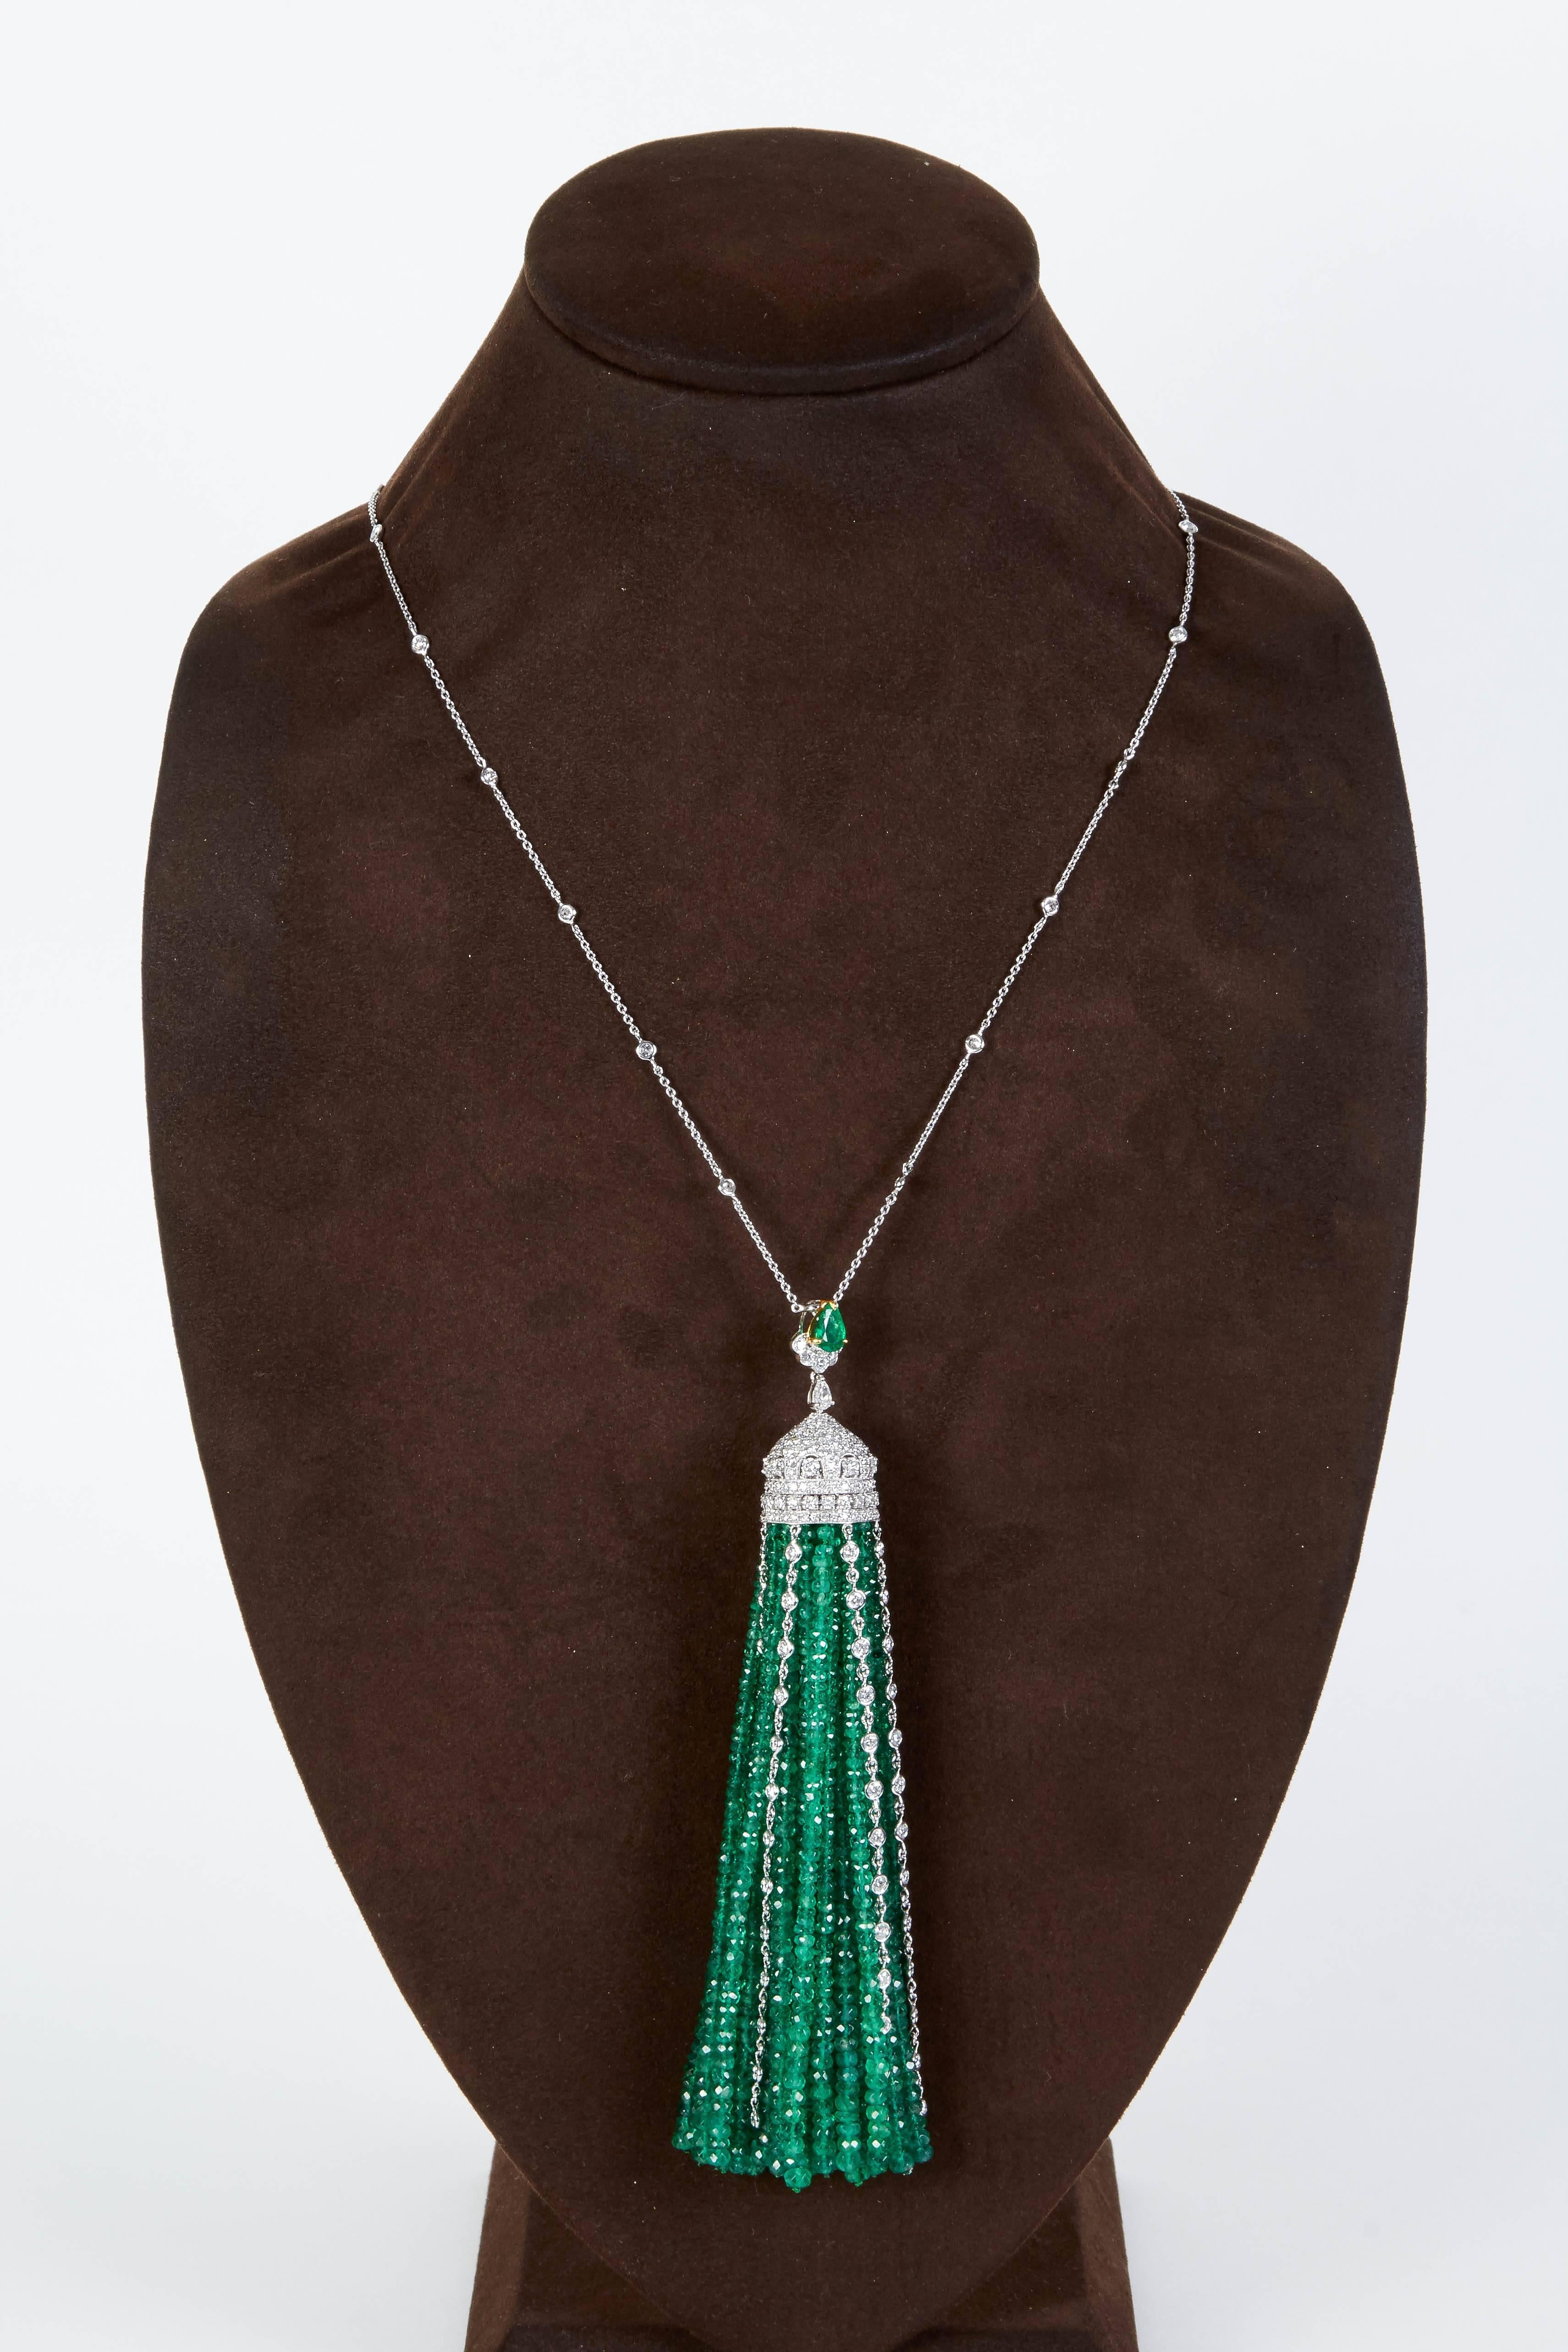 

A FABULOUS PIECE!!!

Over 300 carats of emeralds, 11.13 carats of diamonds.

24 inch chain. 

18k white gold

This piece can be warn casually or to a black tie affair, a great item to add to any collection. 

Matching earrings are